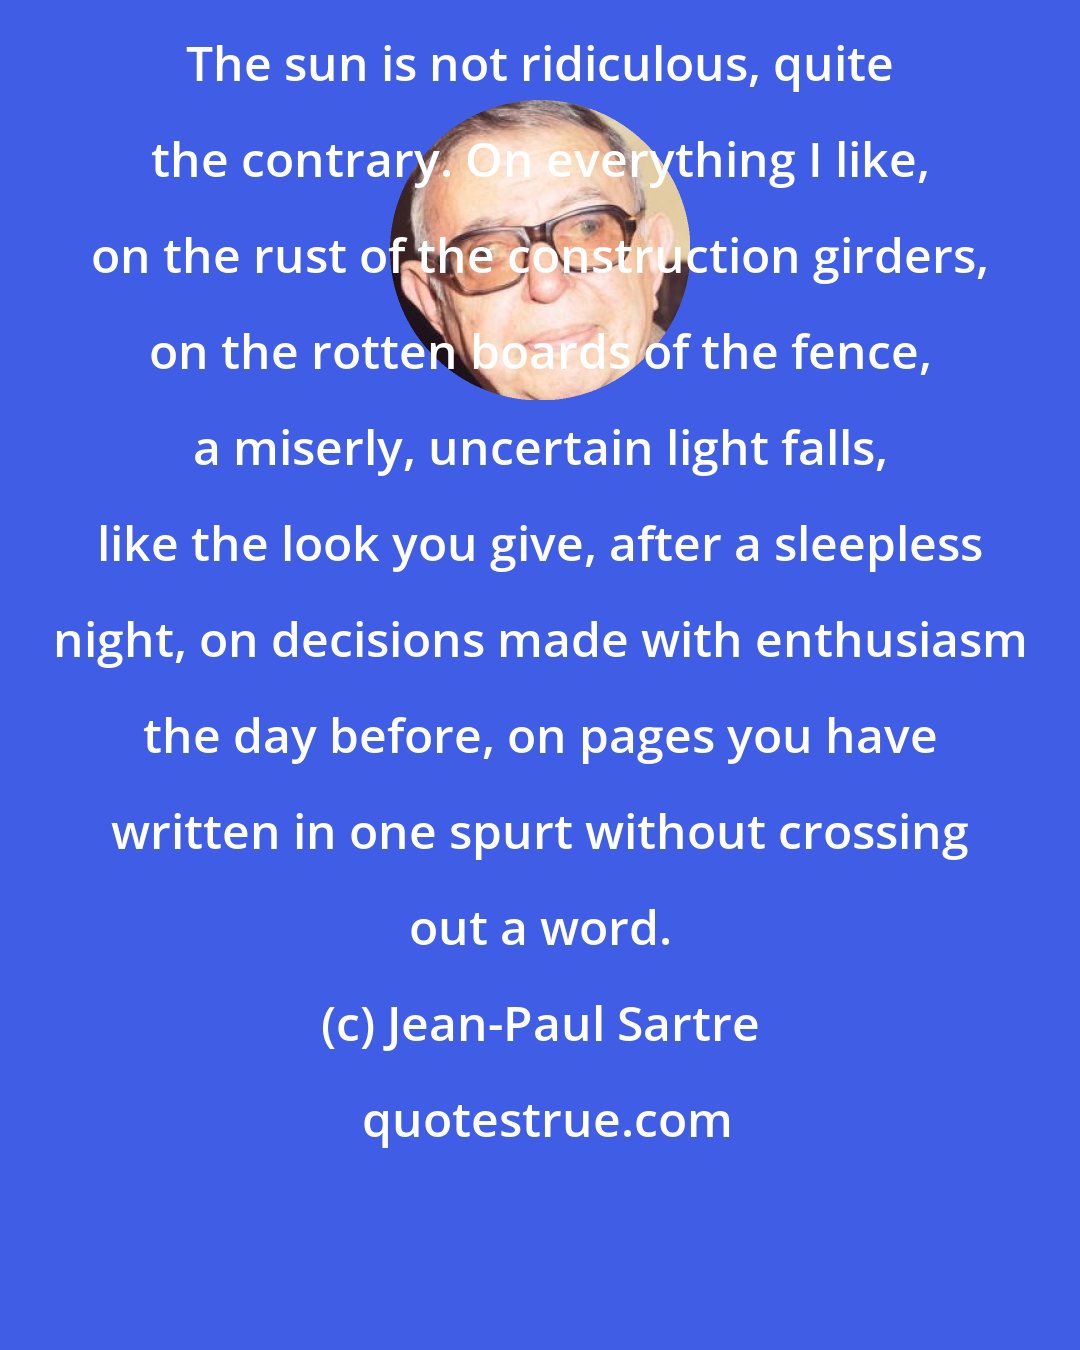 Jean-Paul Sartre: The sun is not ridiculous, quite the contrary. On everything I like, on the rust of the construction girders, on the rotten boards of the fence, a miserly, uncertain light falls, like the look you give, after a sleepless night, on decisions made with enthusiasm the day before, on pages you have written in one spurt without crossing out a word.